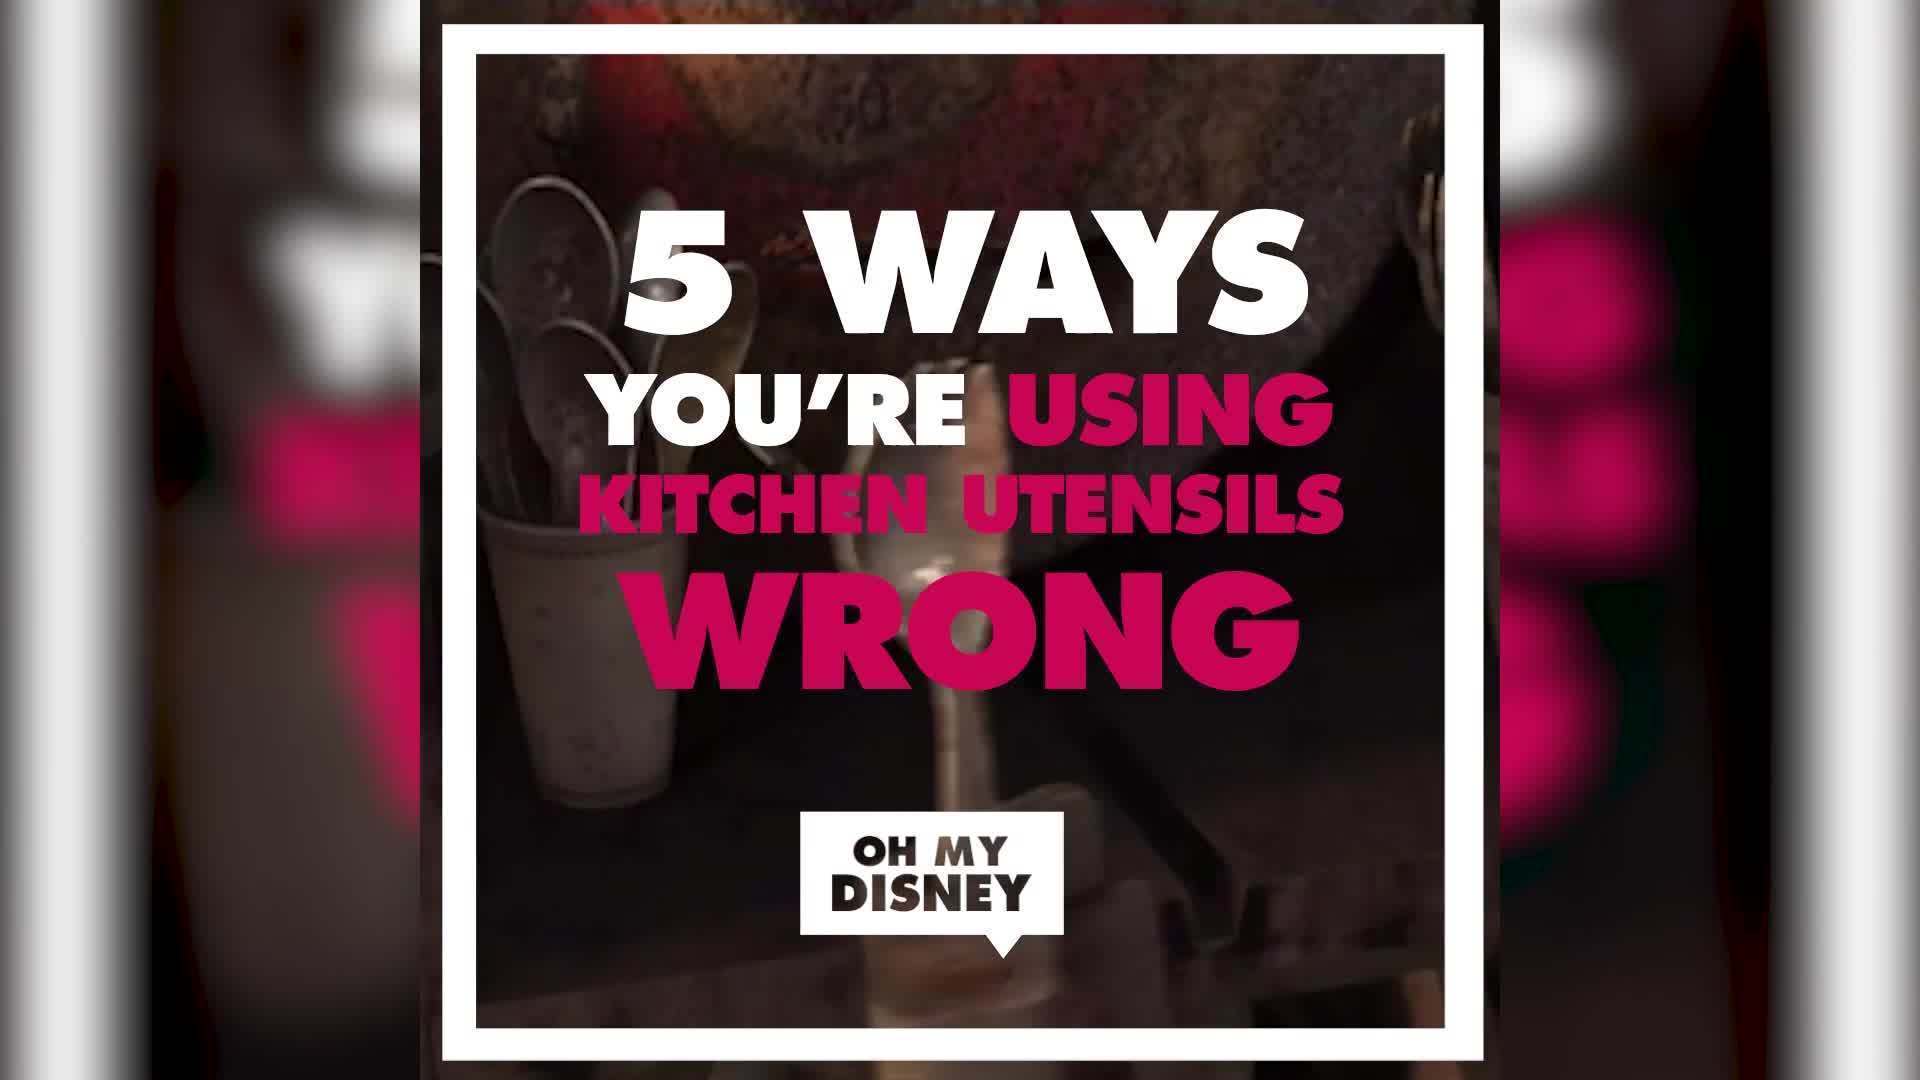 5 Ways You're Using Kitchen Utensils Wrong | ListVids by Oh My Disney